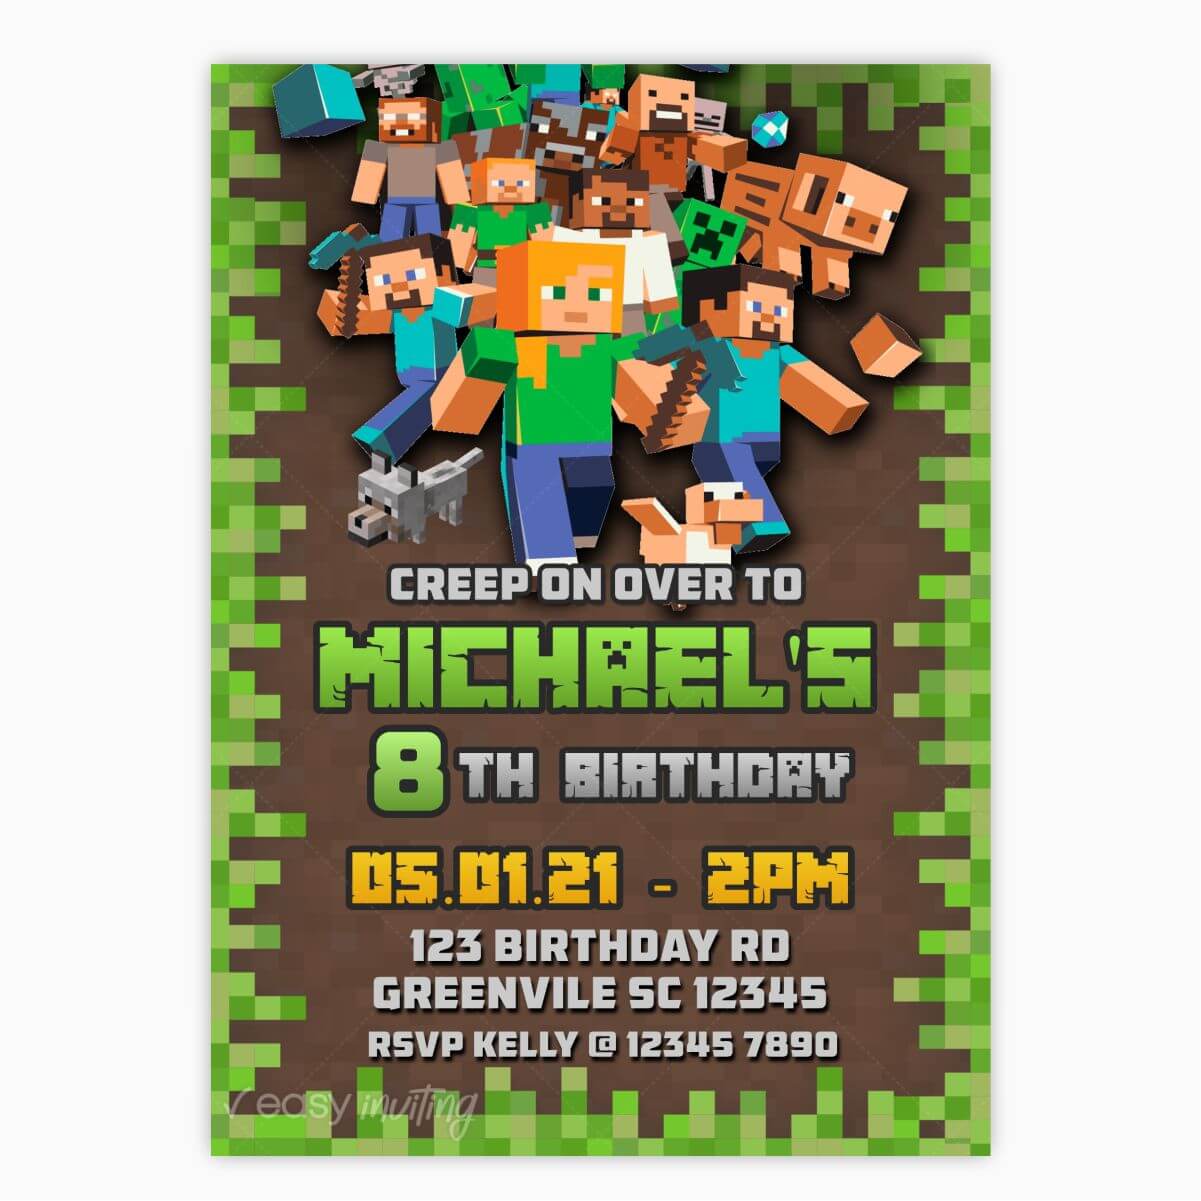 Minecraft: Free Printable Invitations. - Oh My Fiesta! in english